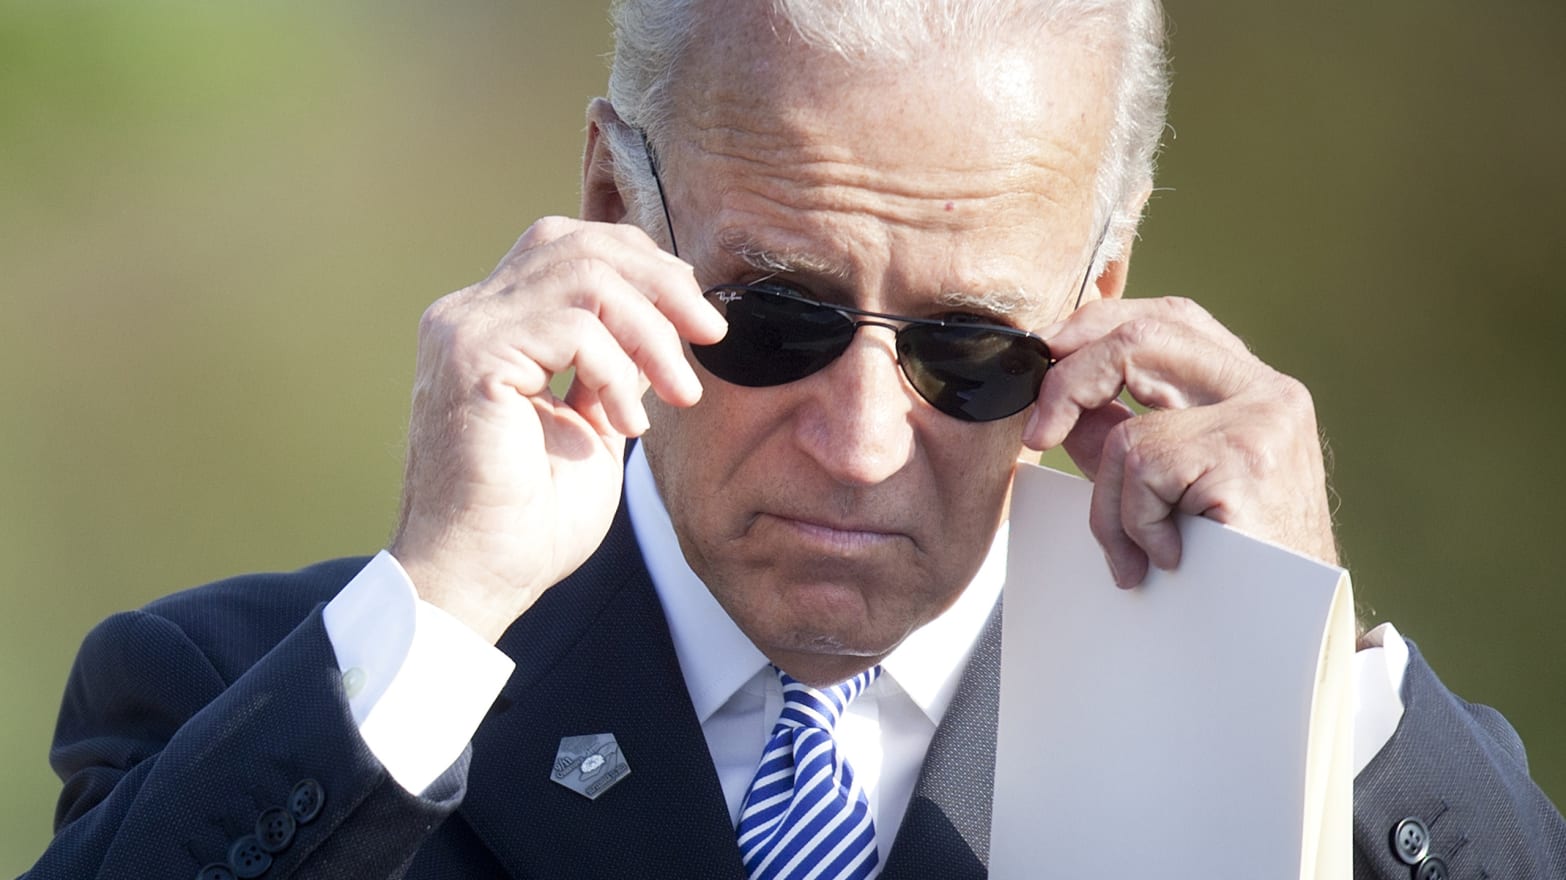 Where There's Trouble, You'll Usually Find Joe Biden